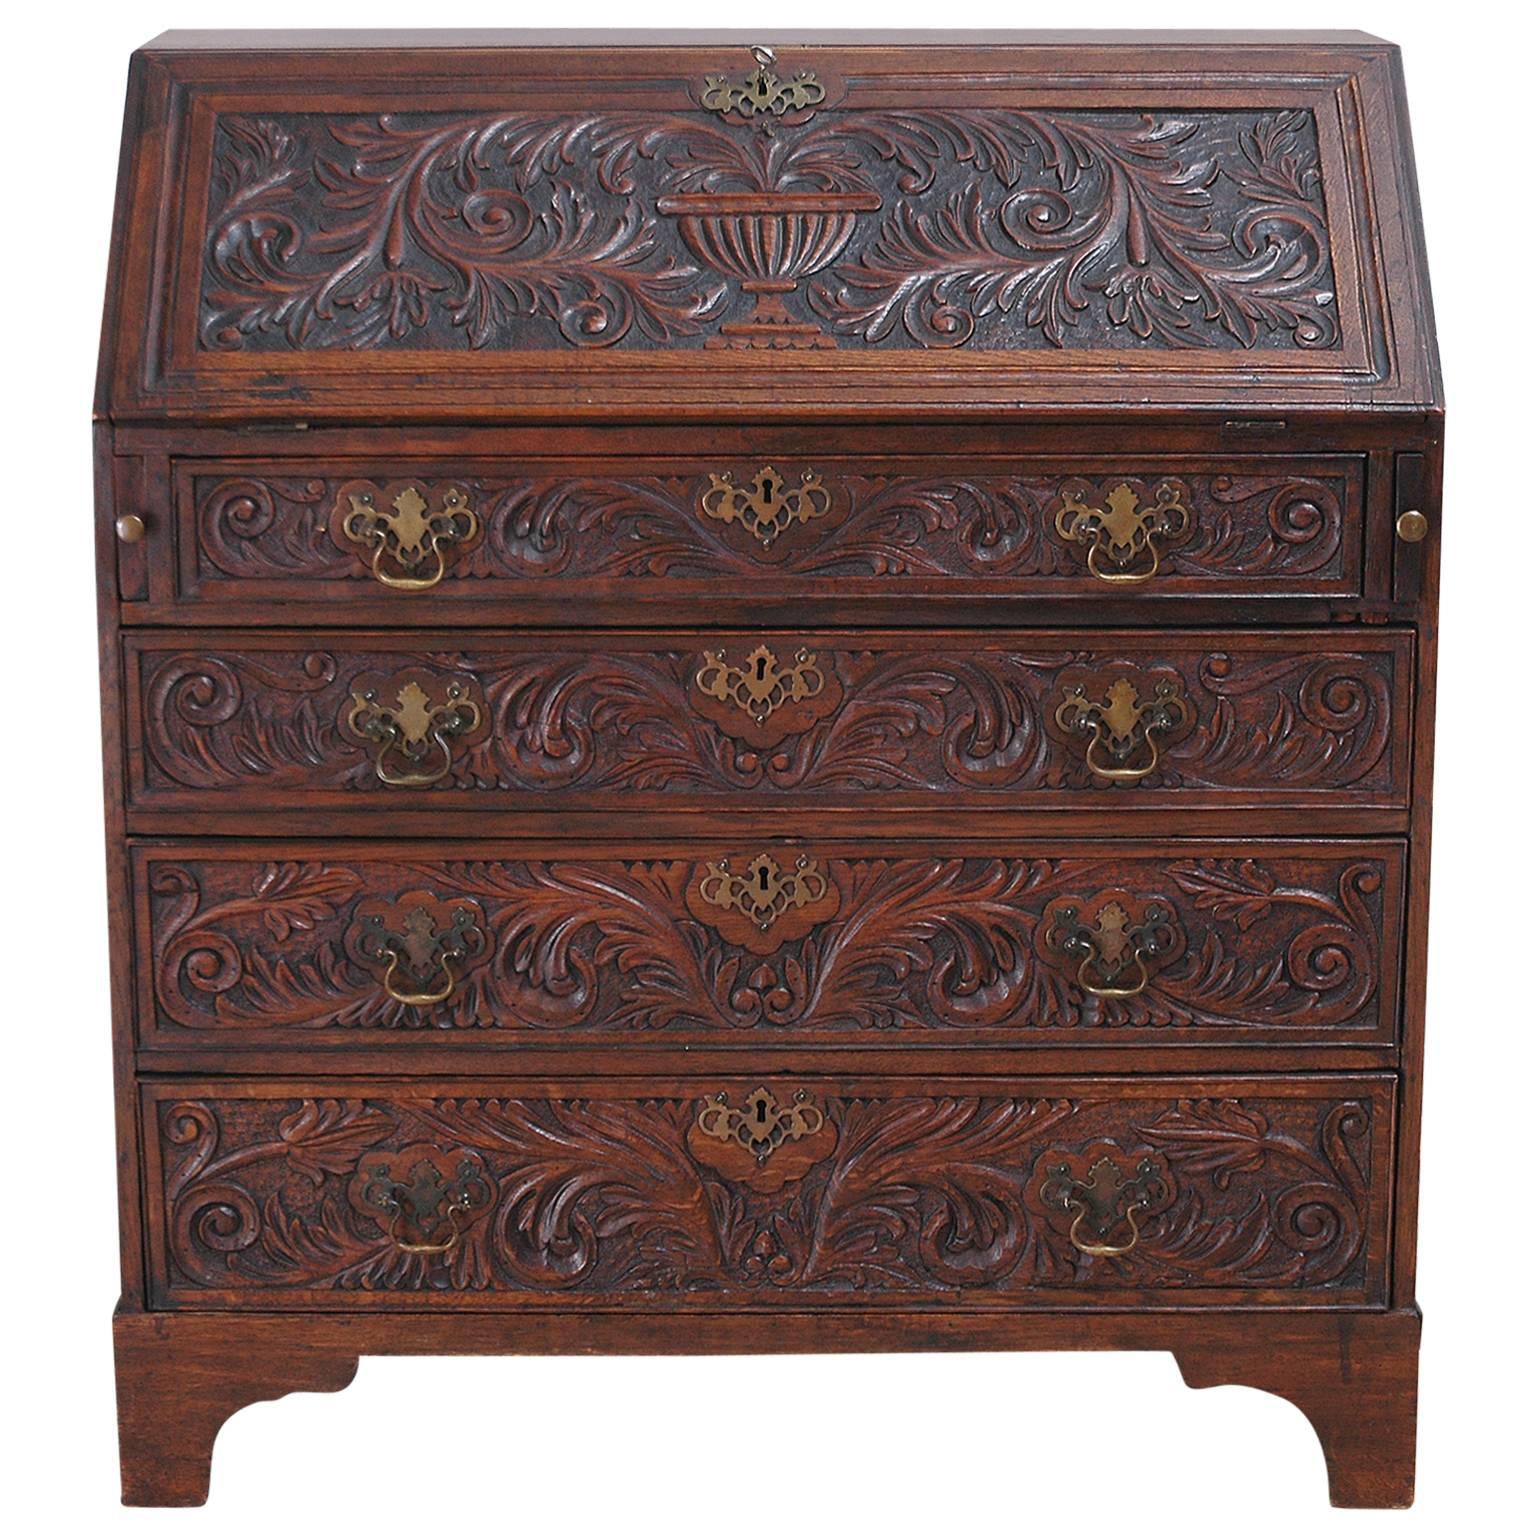 Early 19th century oak English fall-front secretary with carvings of acanthus leaves and urns.
Note: Relaxed, antique condition. Drawers are working well and original brasses are complete.
You should always request a shipping quote.
Quoted amounts